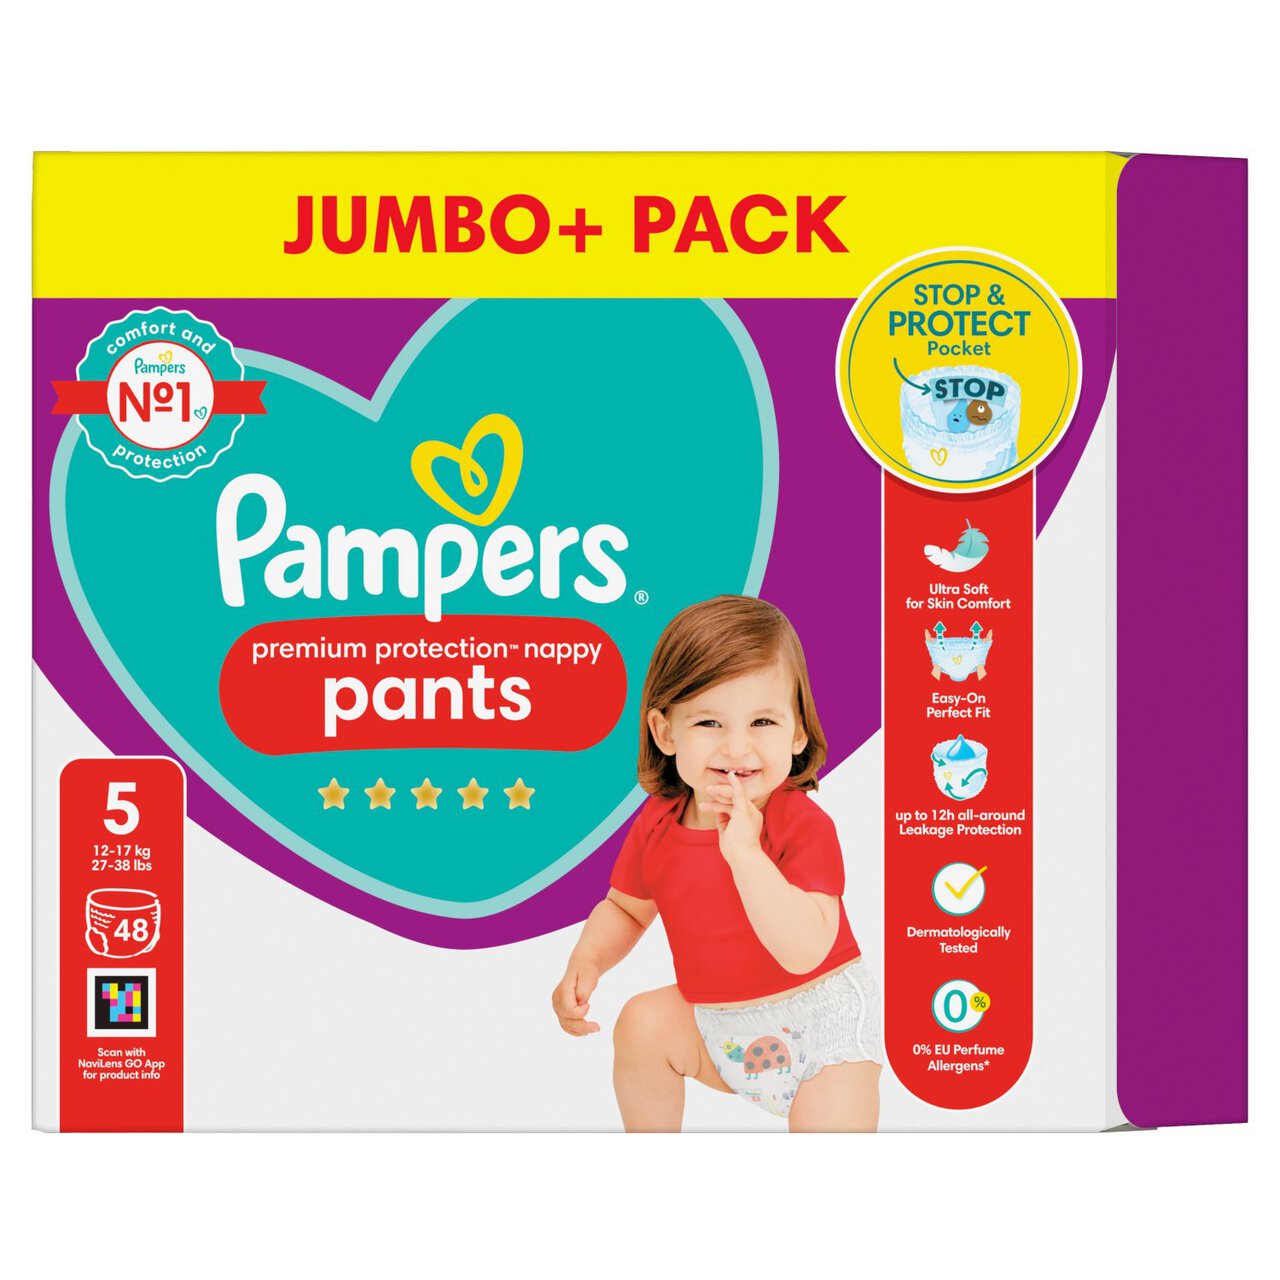 Pampers Premium Protection Nappy Pants, Size 5 (12-17kg) Jumbo+ Pack 48 per pack